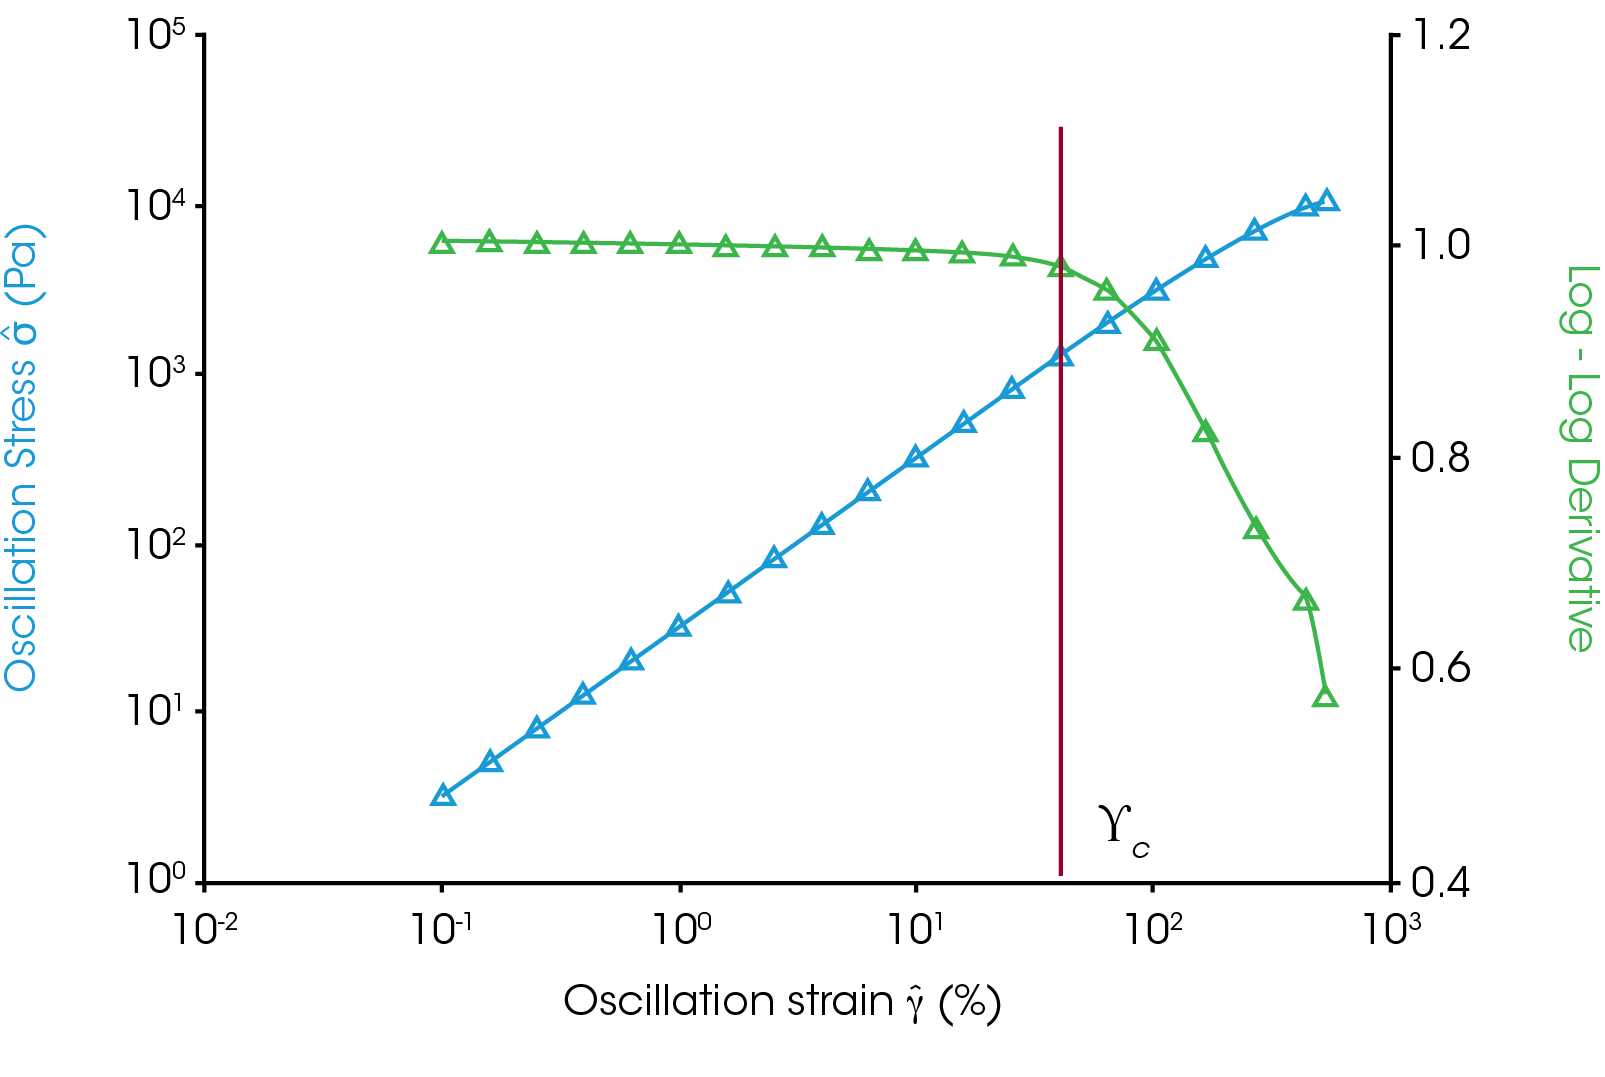 Figure 4. Strain sweep of polystyrene at 250 °C and 1 Hz frequency. The stress (blue) and derivative of Log stress vs Log strain are shown (green). The derivative is close to 1 in the linear region and deviates from 1 at the critical strain. The critical strain marked is ~40% and the derivative is 0.98